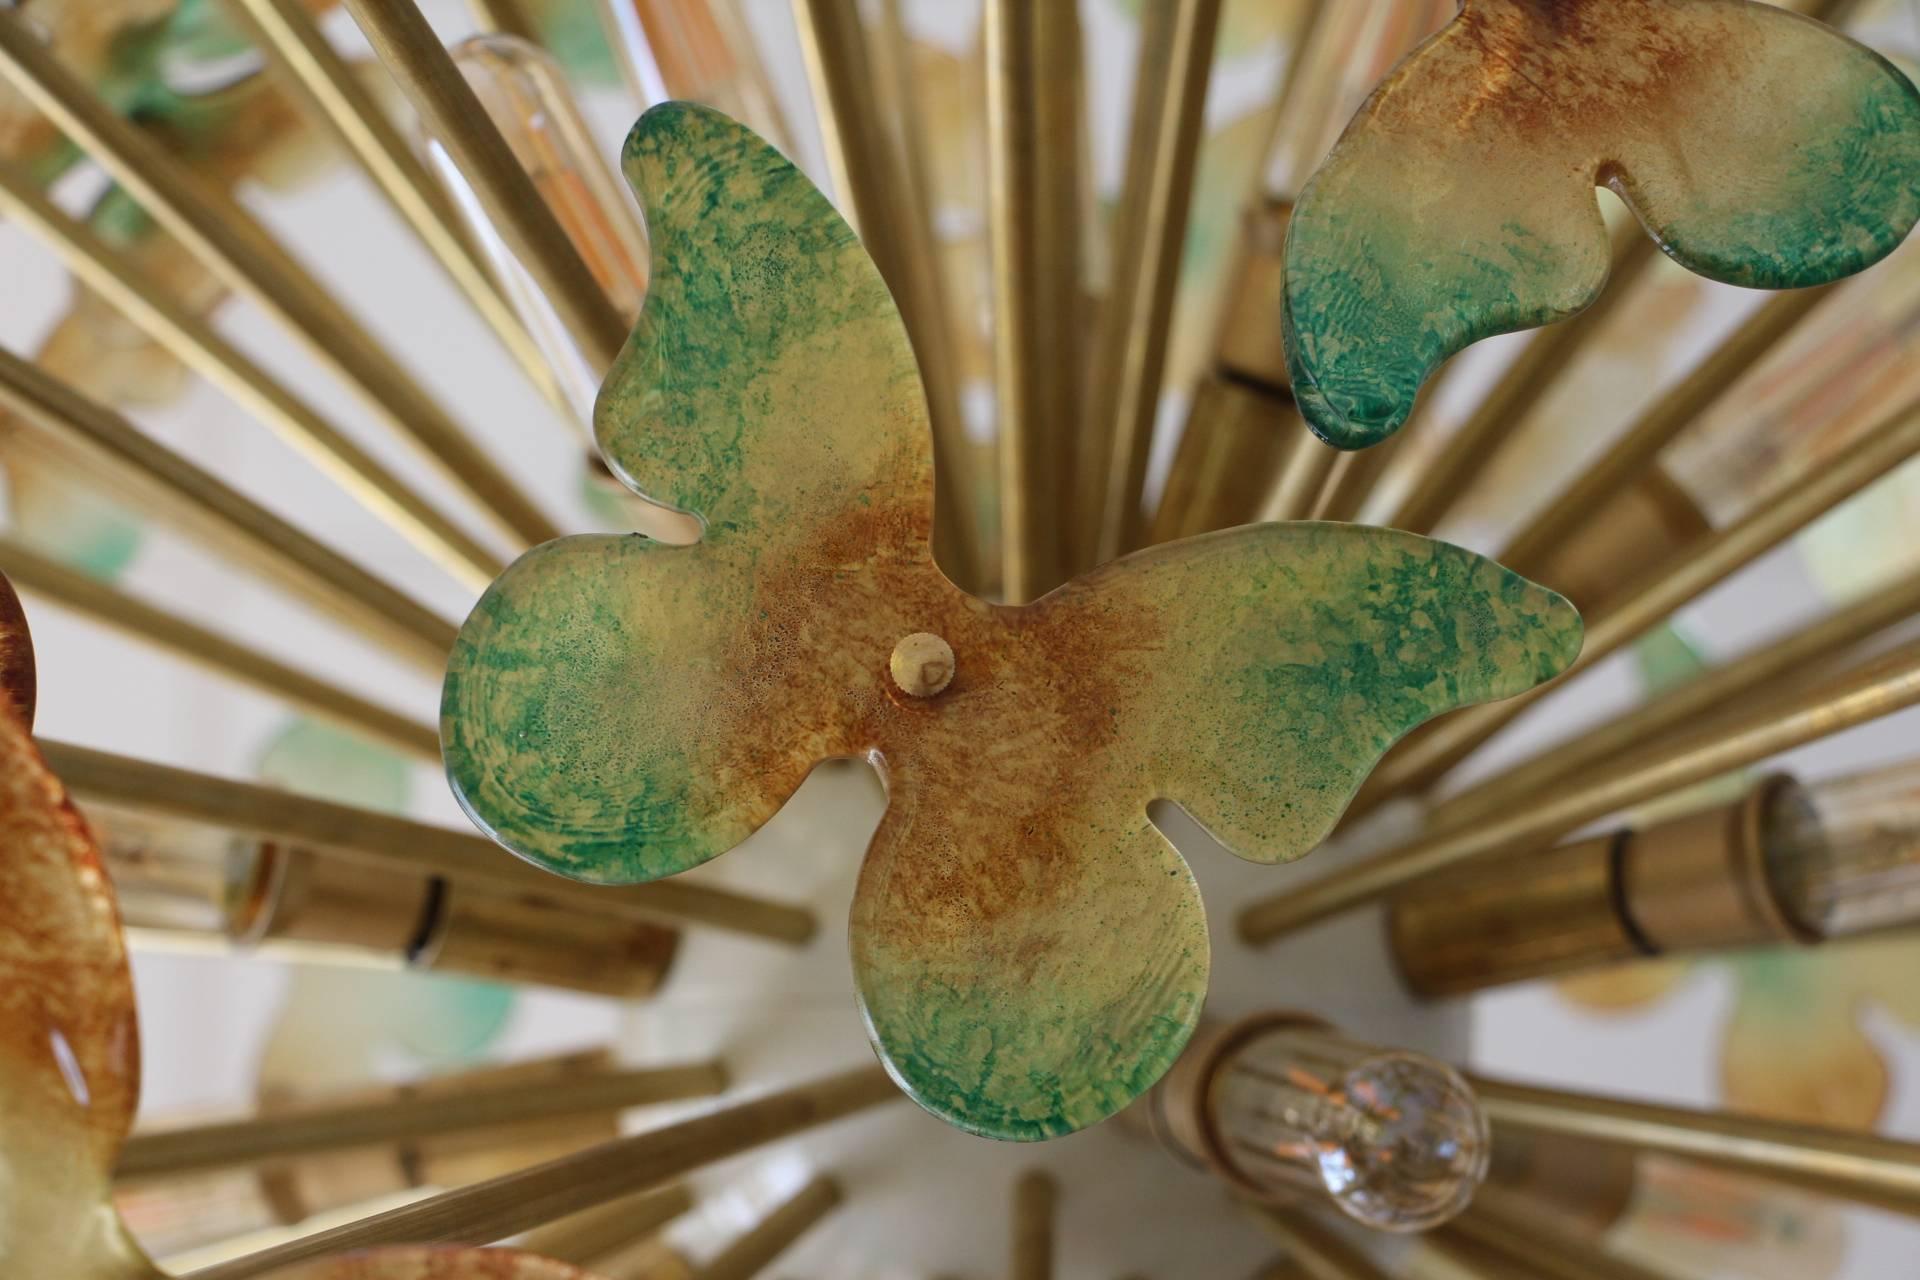 This very unusual sputnik chandelier features a multitude of brass rods, each ending with flying butterflies in Murano glass.
All the rods have got different length sothat butterflies are on different levels and it gives to this chandelier a very